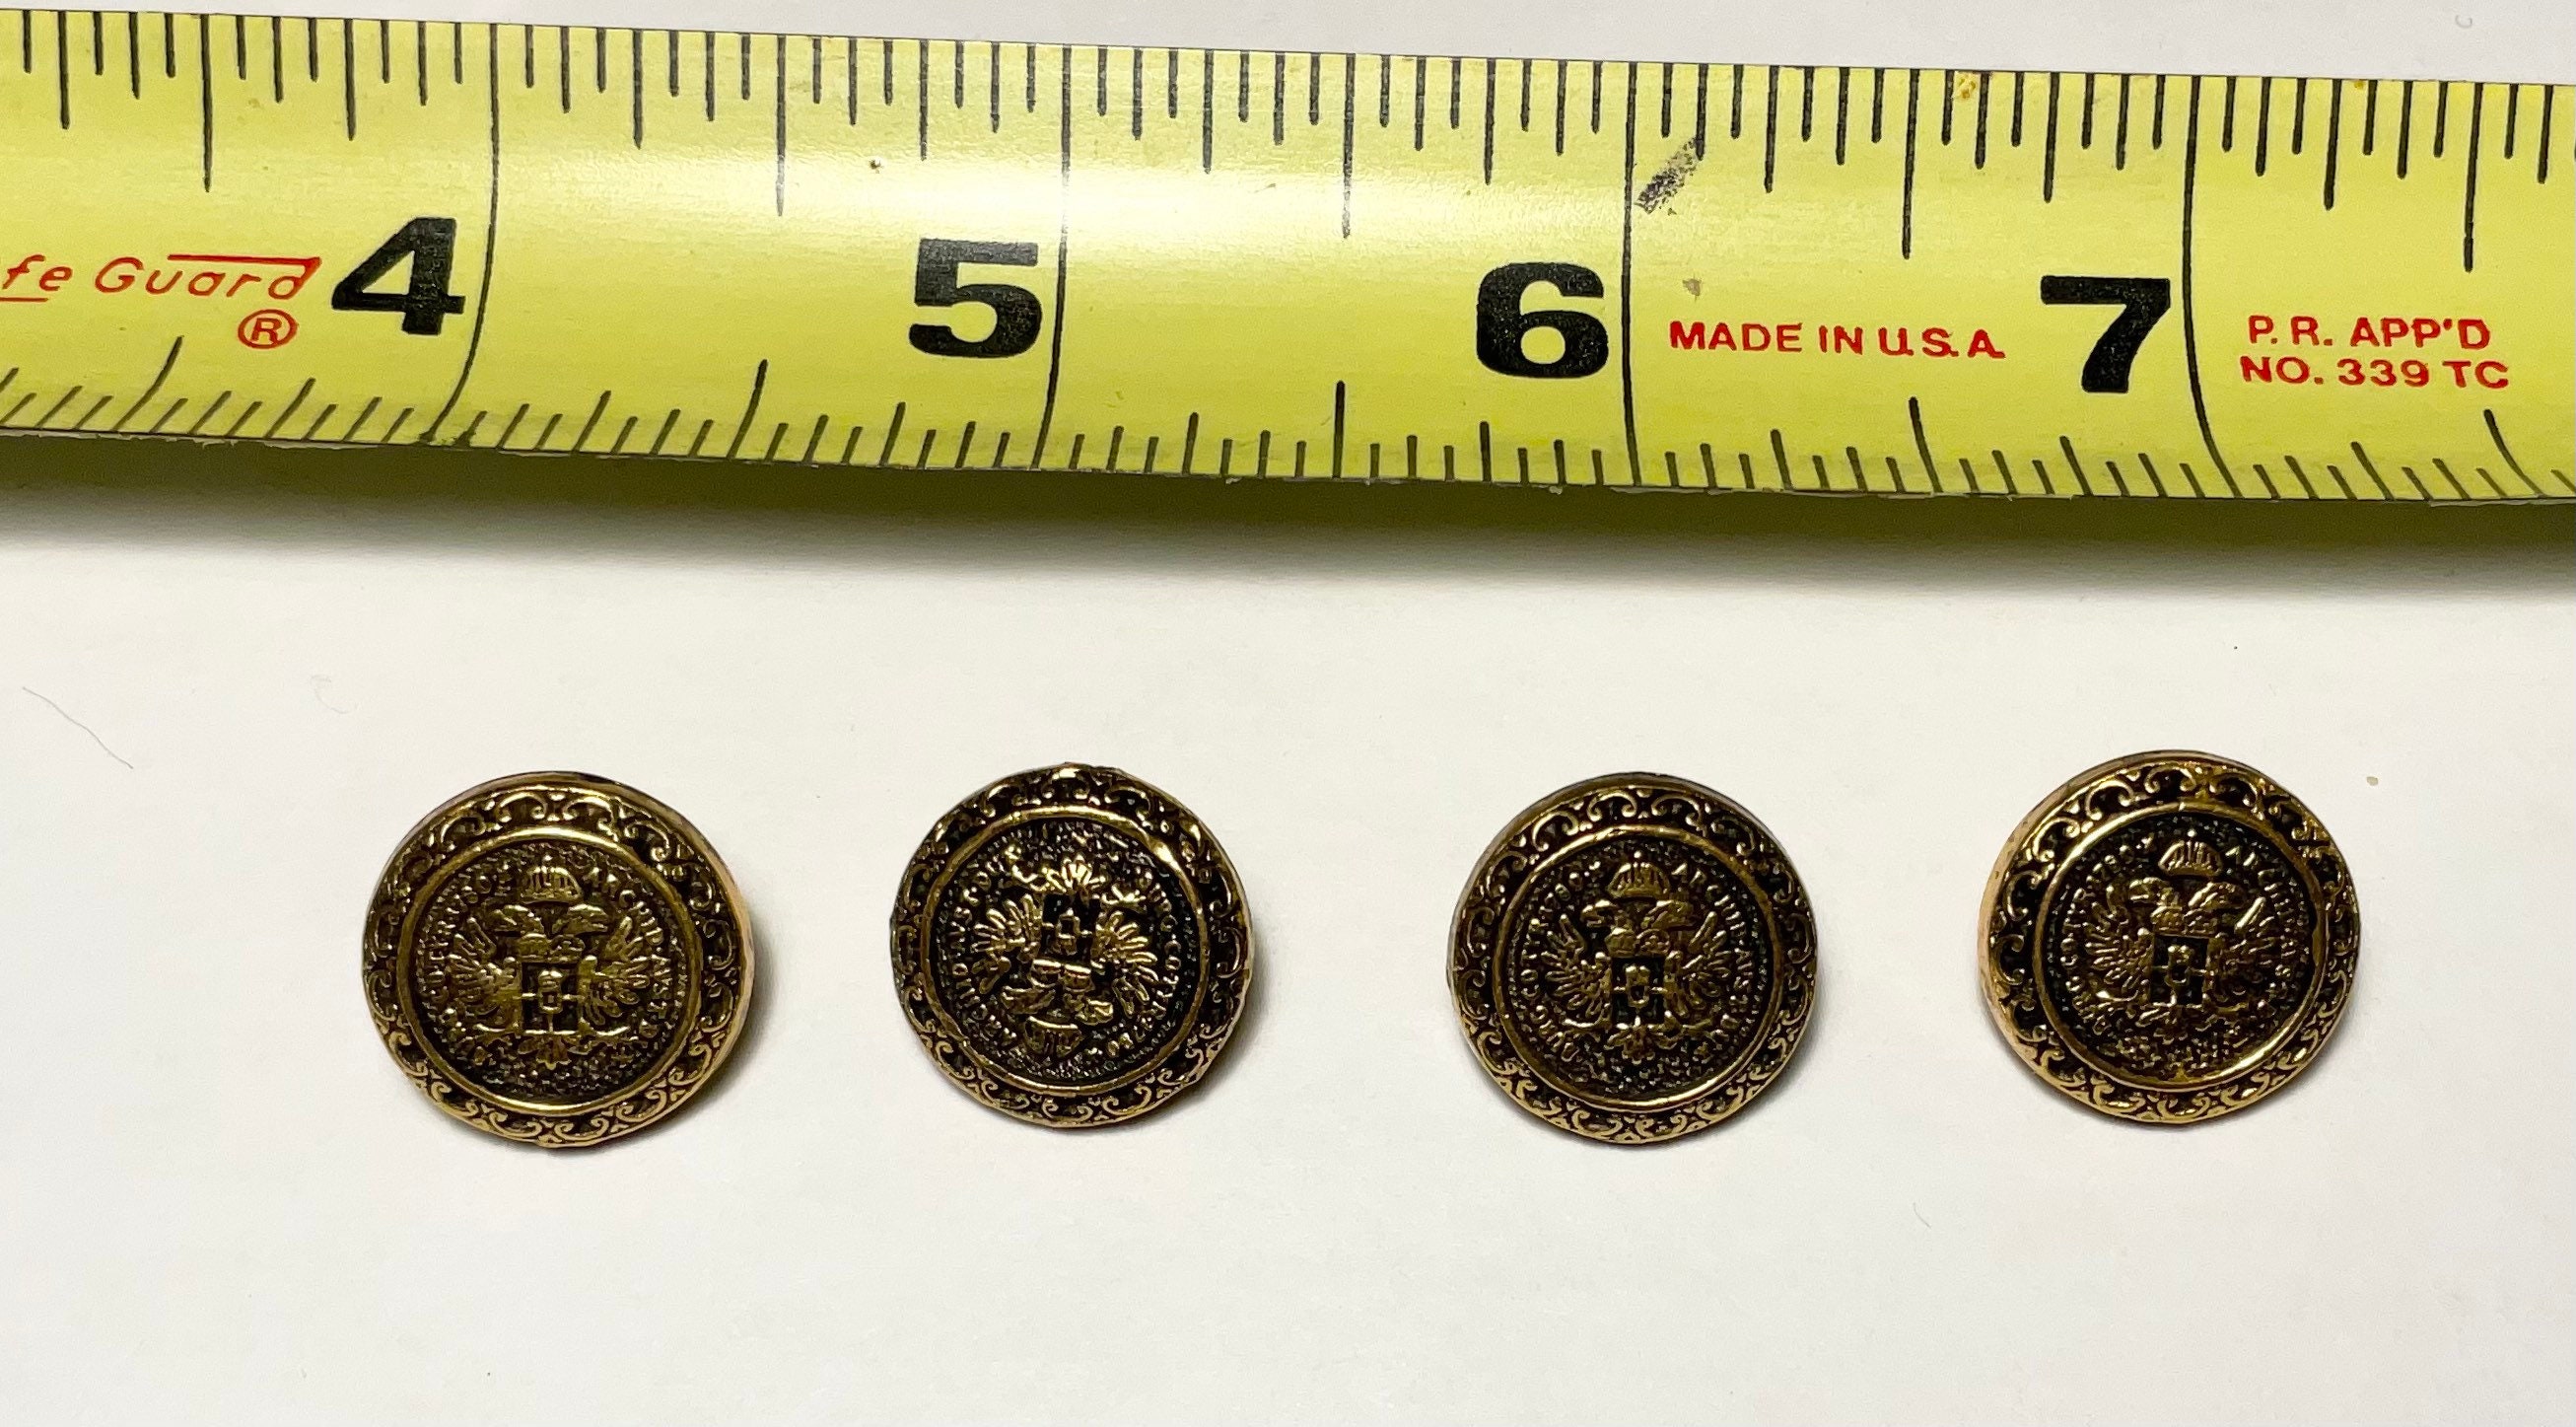 Vintage Archid Avst Dux Burg Co TYR 1780 5/8 in Brass Buttons Set of 4 ...